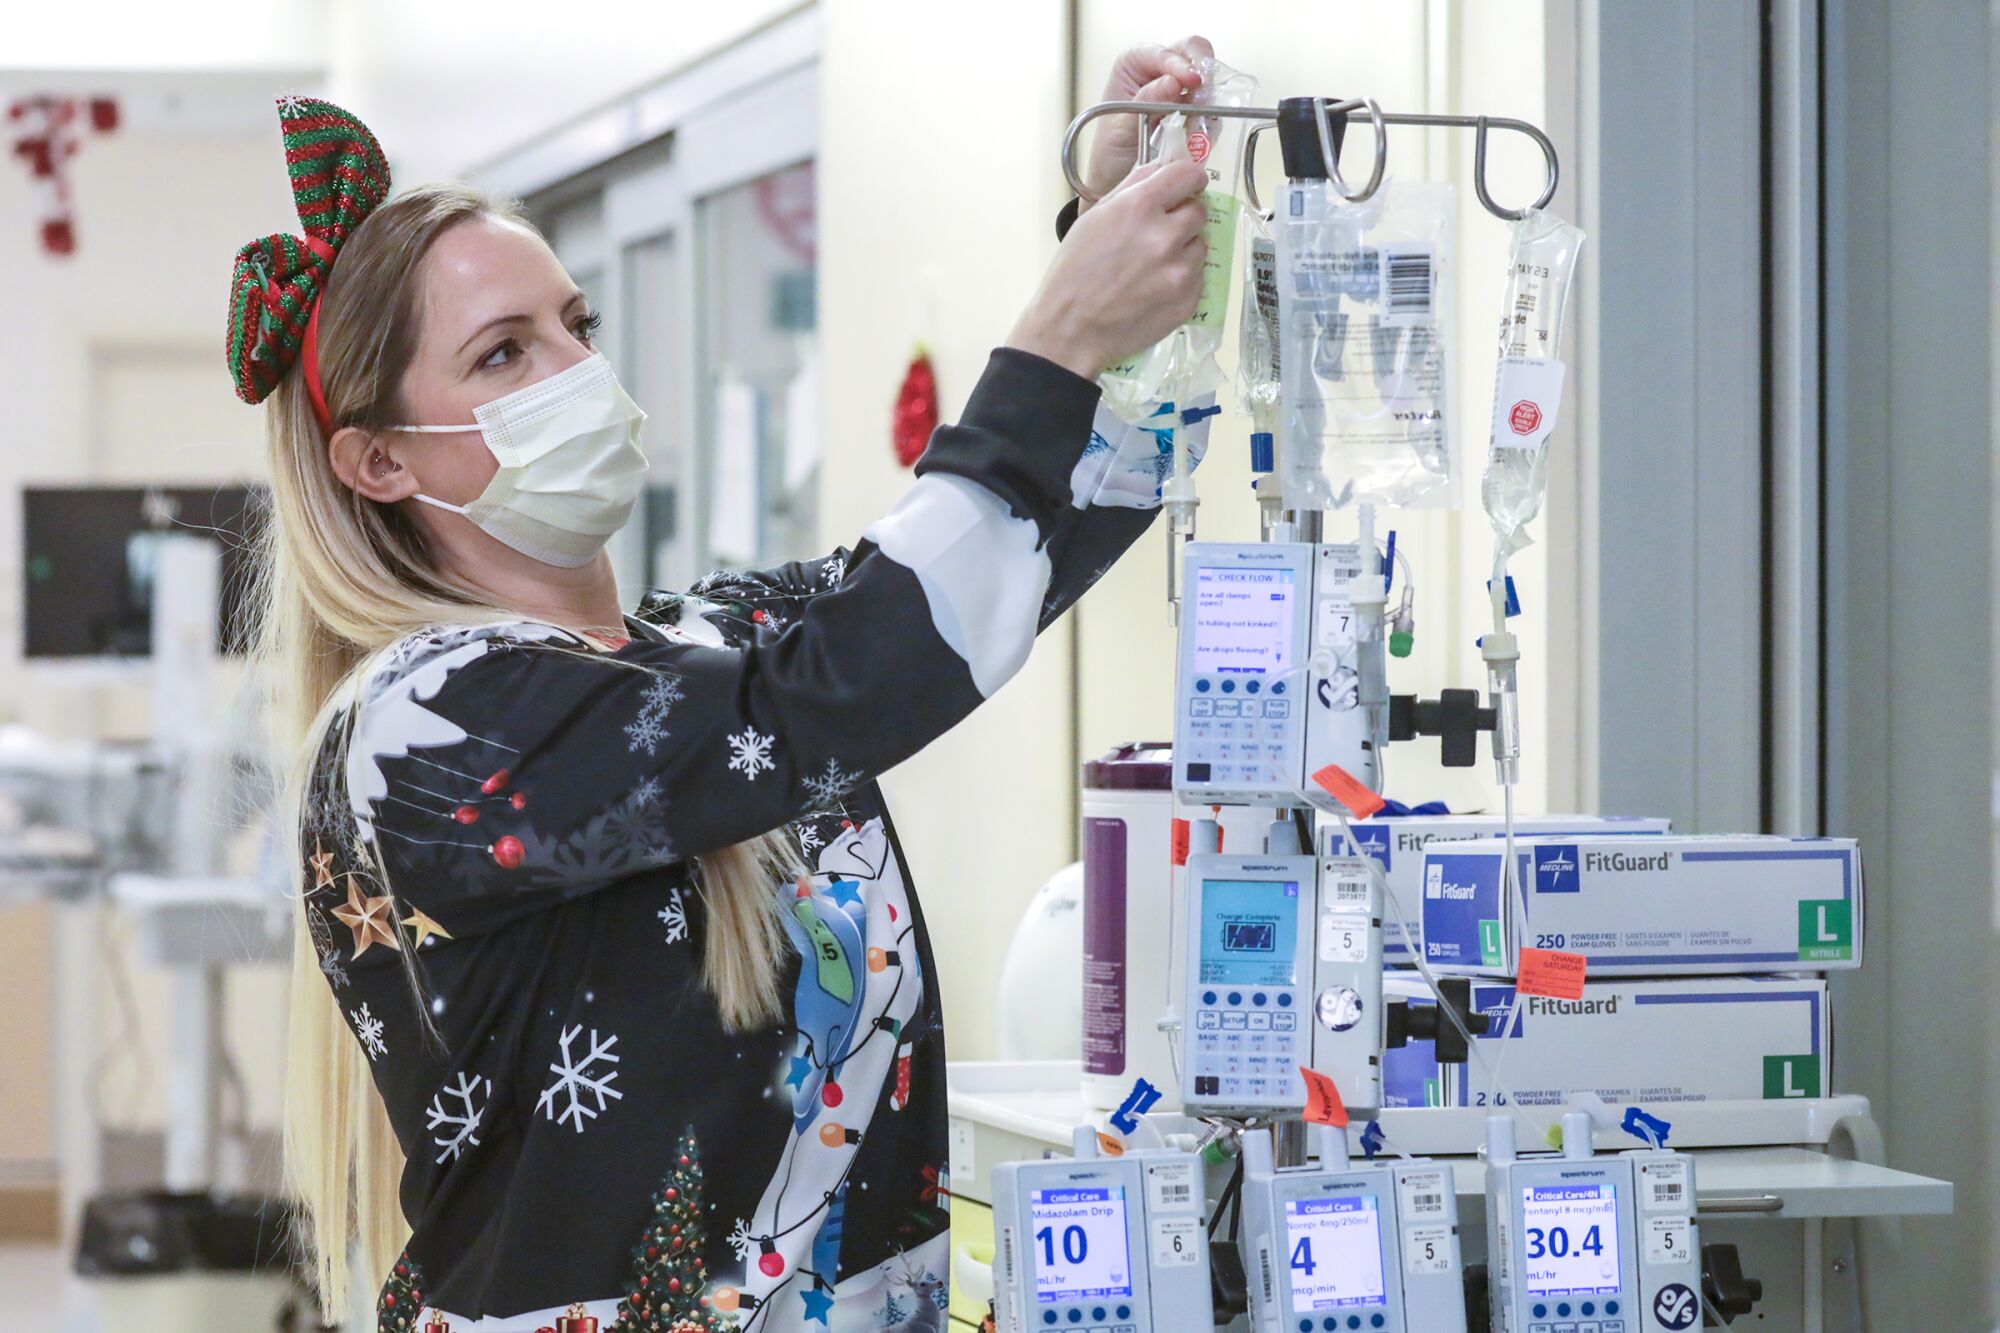 ICU charge nurse Beth Koelliker checks intravenous pumps delivering medications to COVID patient 